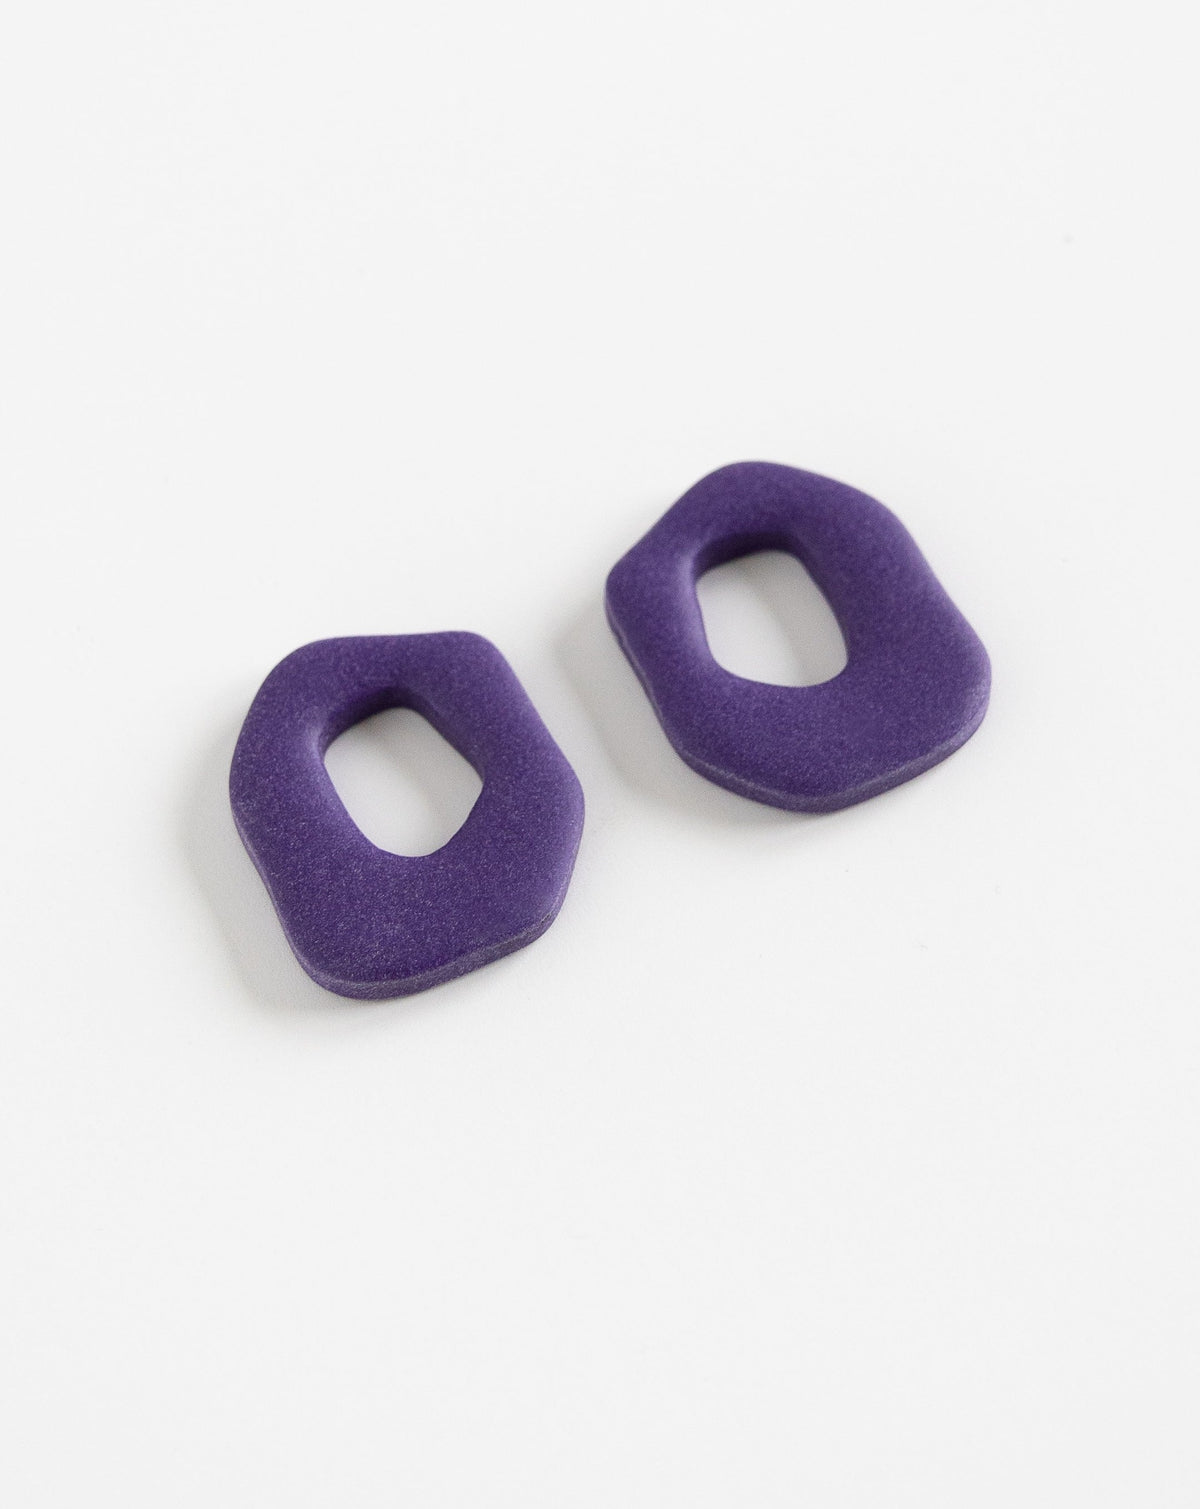 Close up of Darien Beads in Purple color, angled view